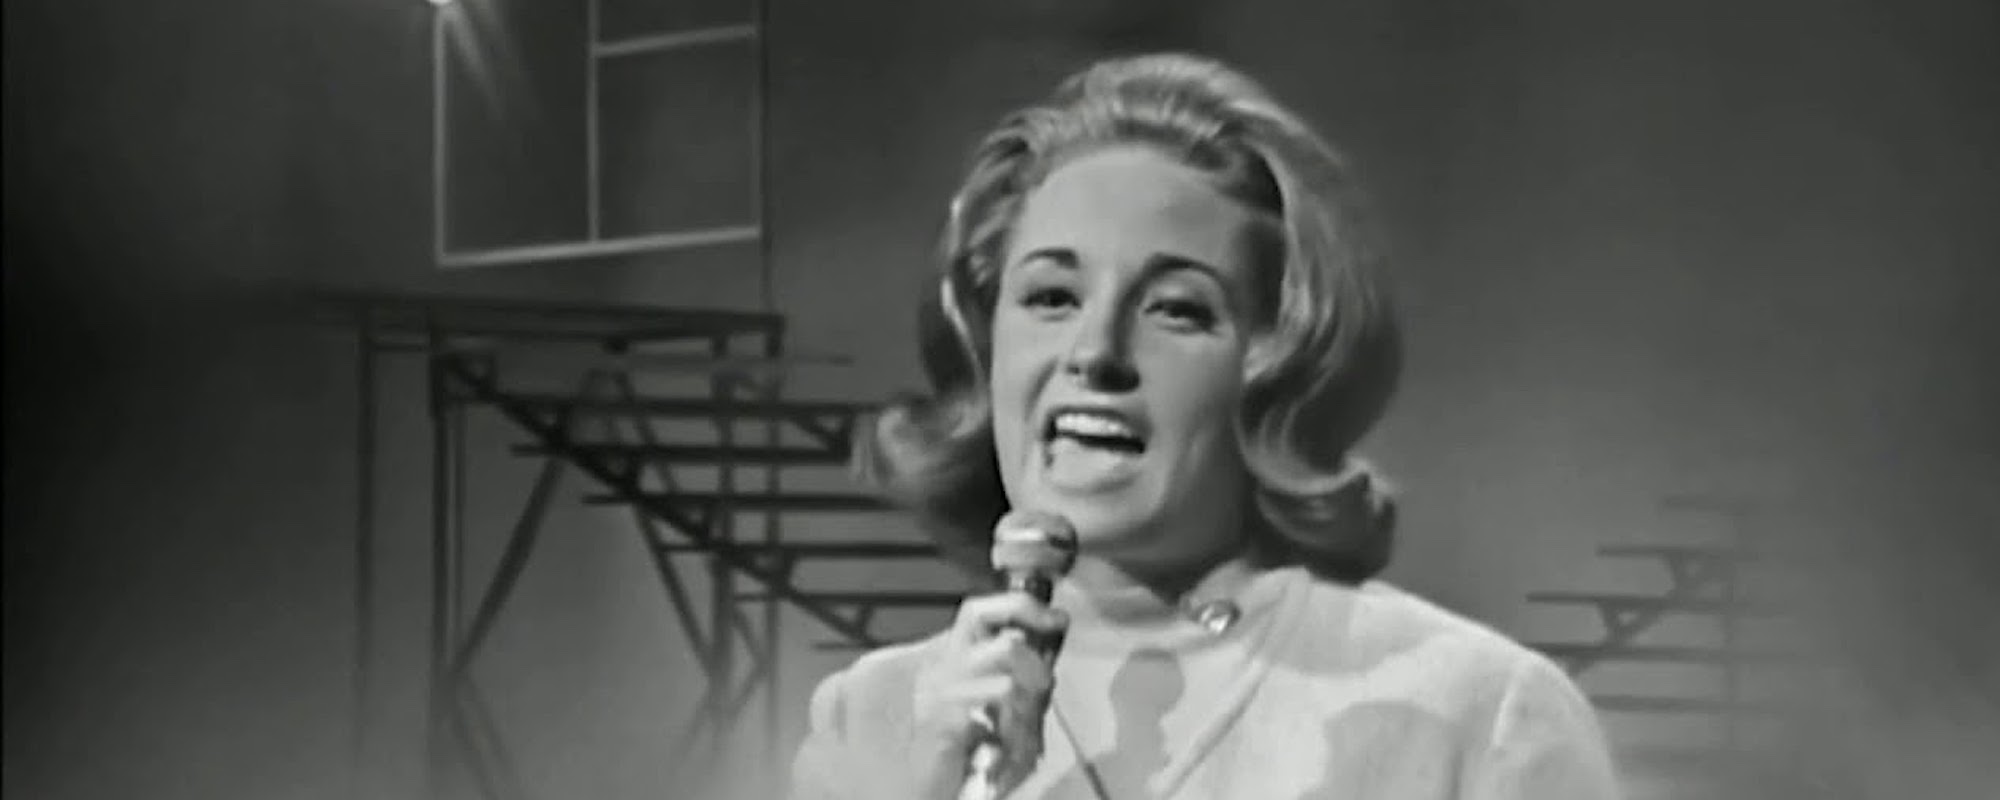 Behind the Song Lyrics: Lesley Gore’s Feminist, Civil Rights Anthem “You Don’t Own Me”